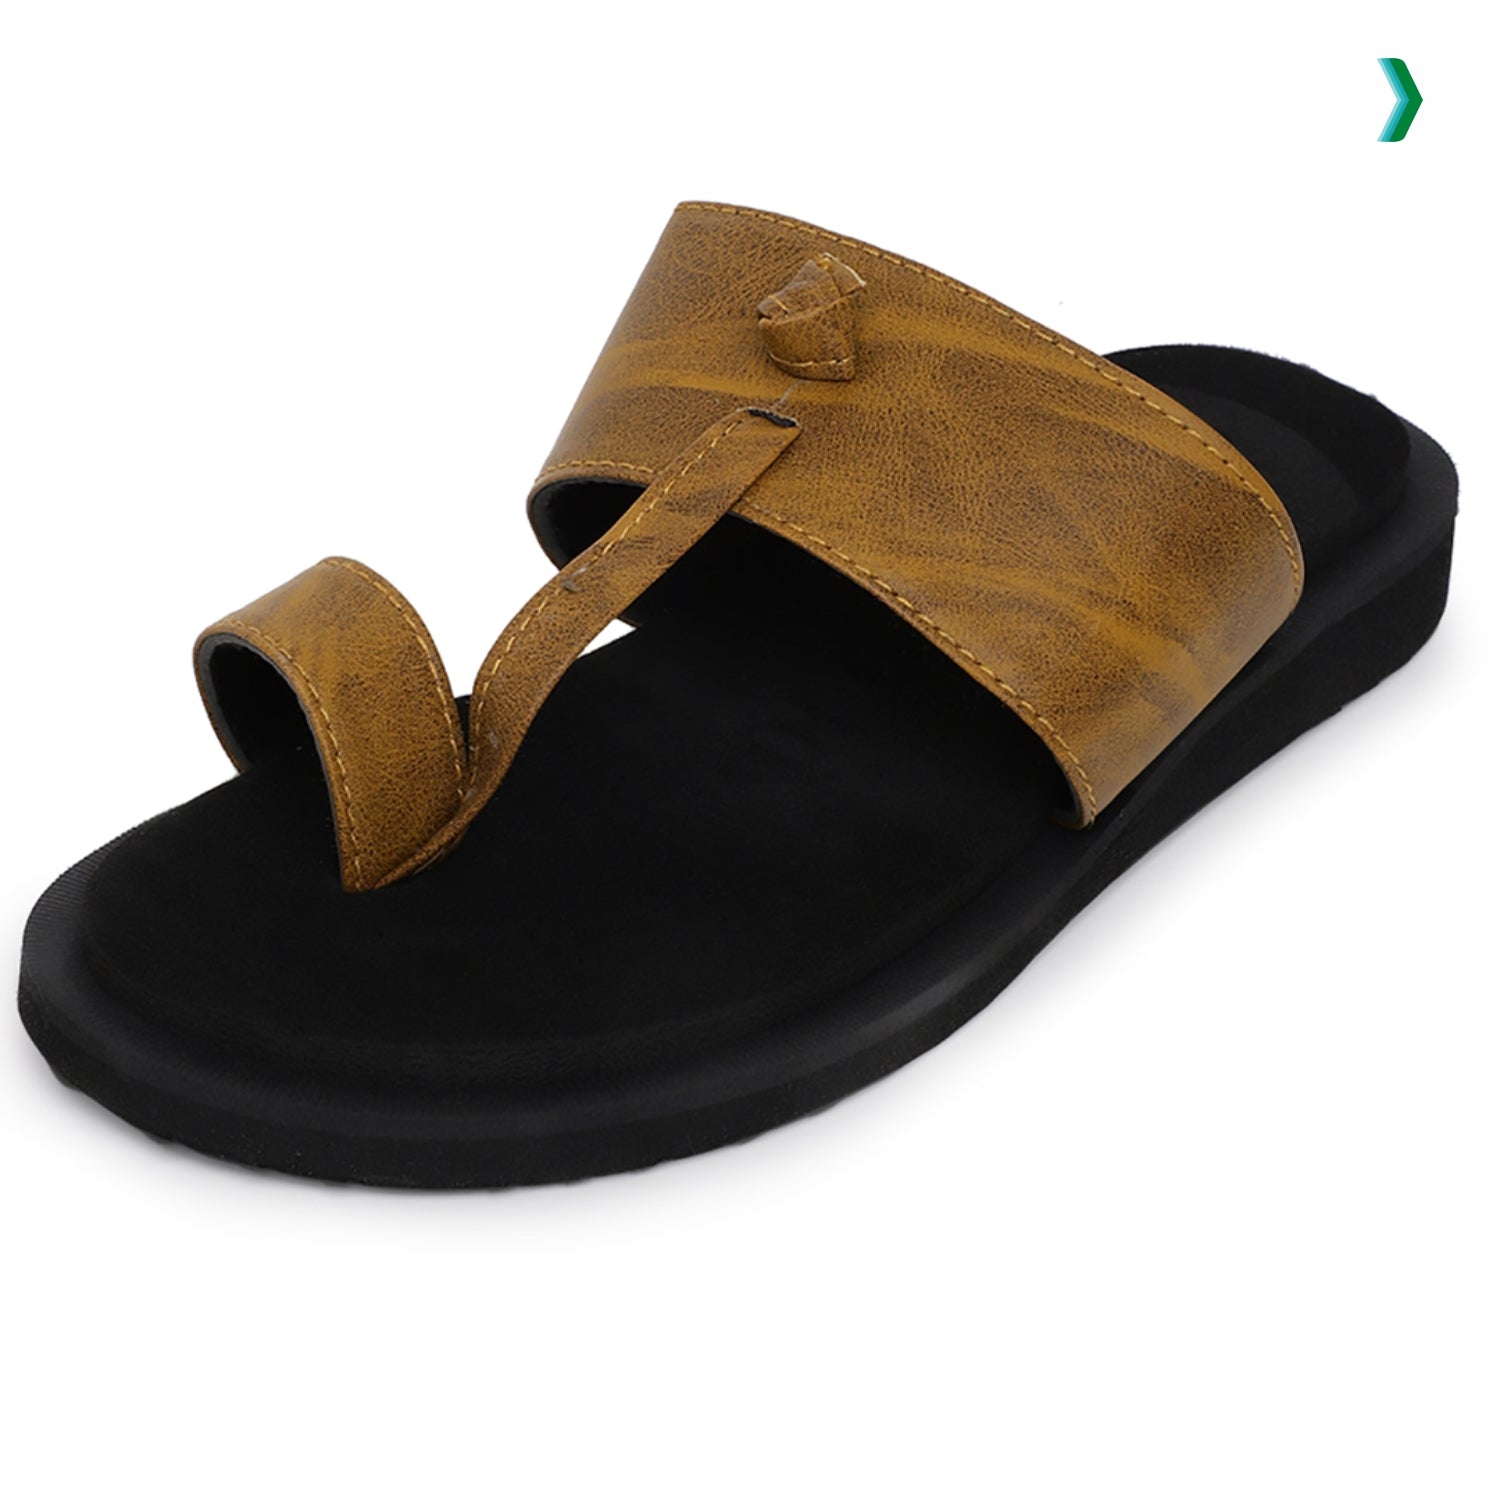 Luxury 100% Leather Designer Thong Slippers For Men And Women Metal Logo Flip  Flops For Summer, Beach, And Hotel Bathrooms Casual Flat Sandals In Large  Sizes 35 45 From Ttcasual, $47.75 | DHgate.Com